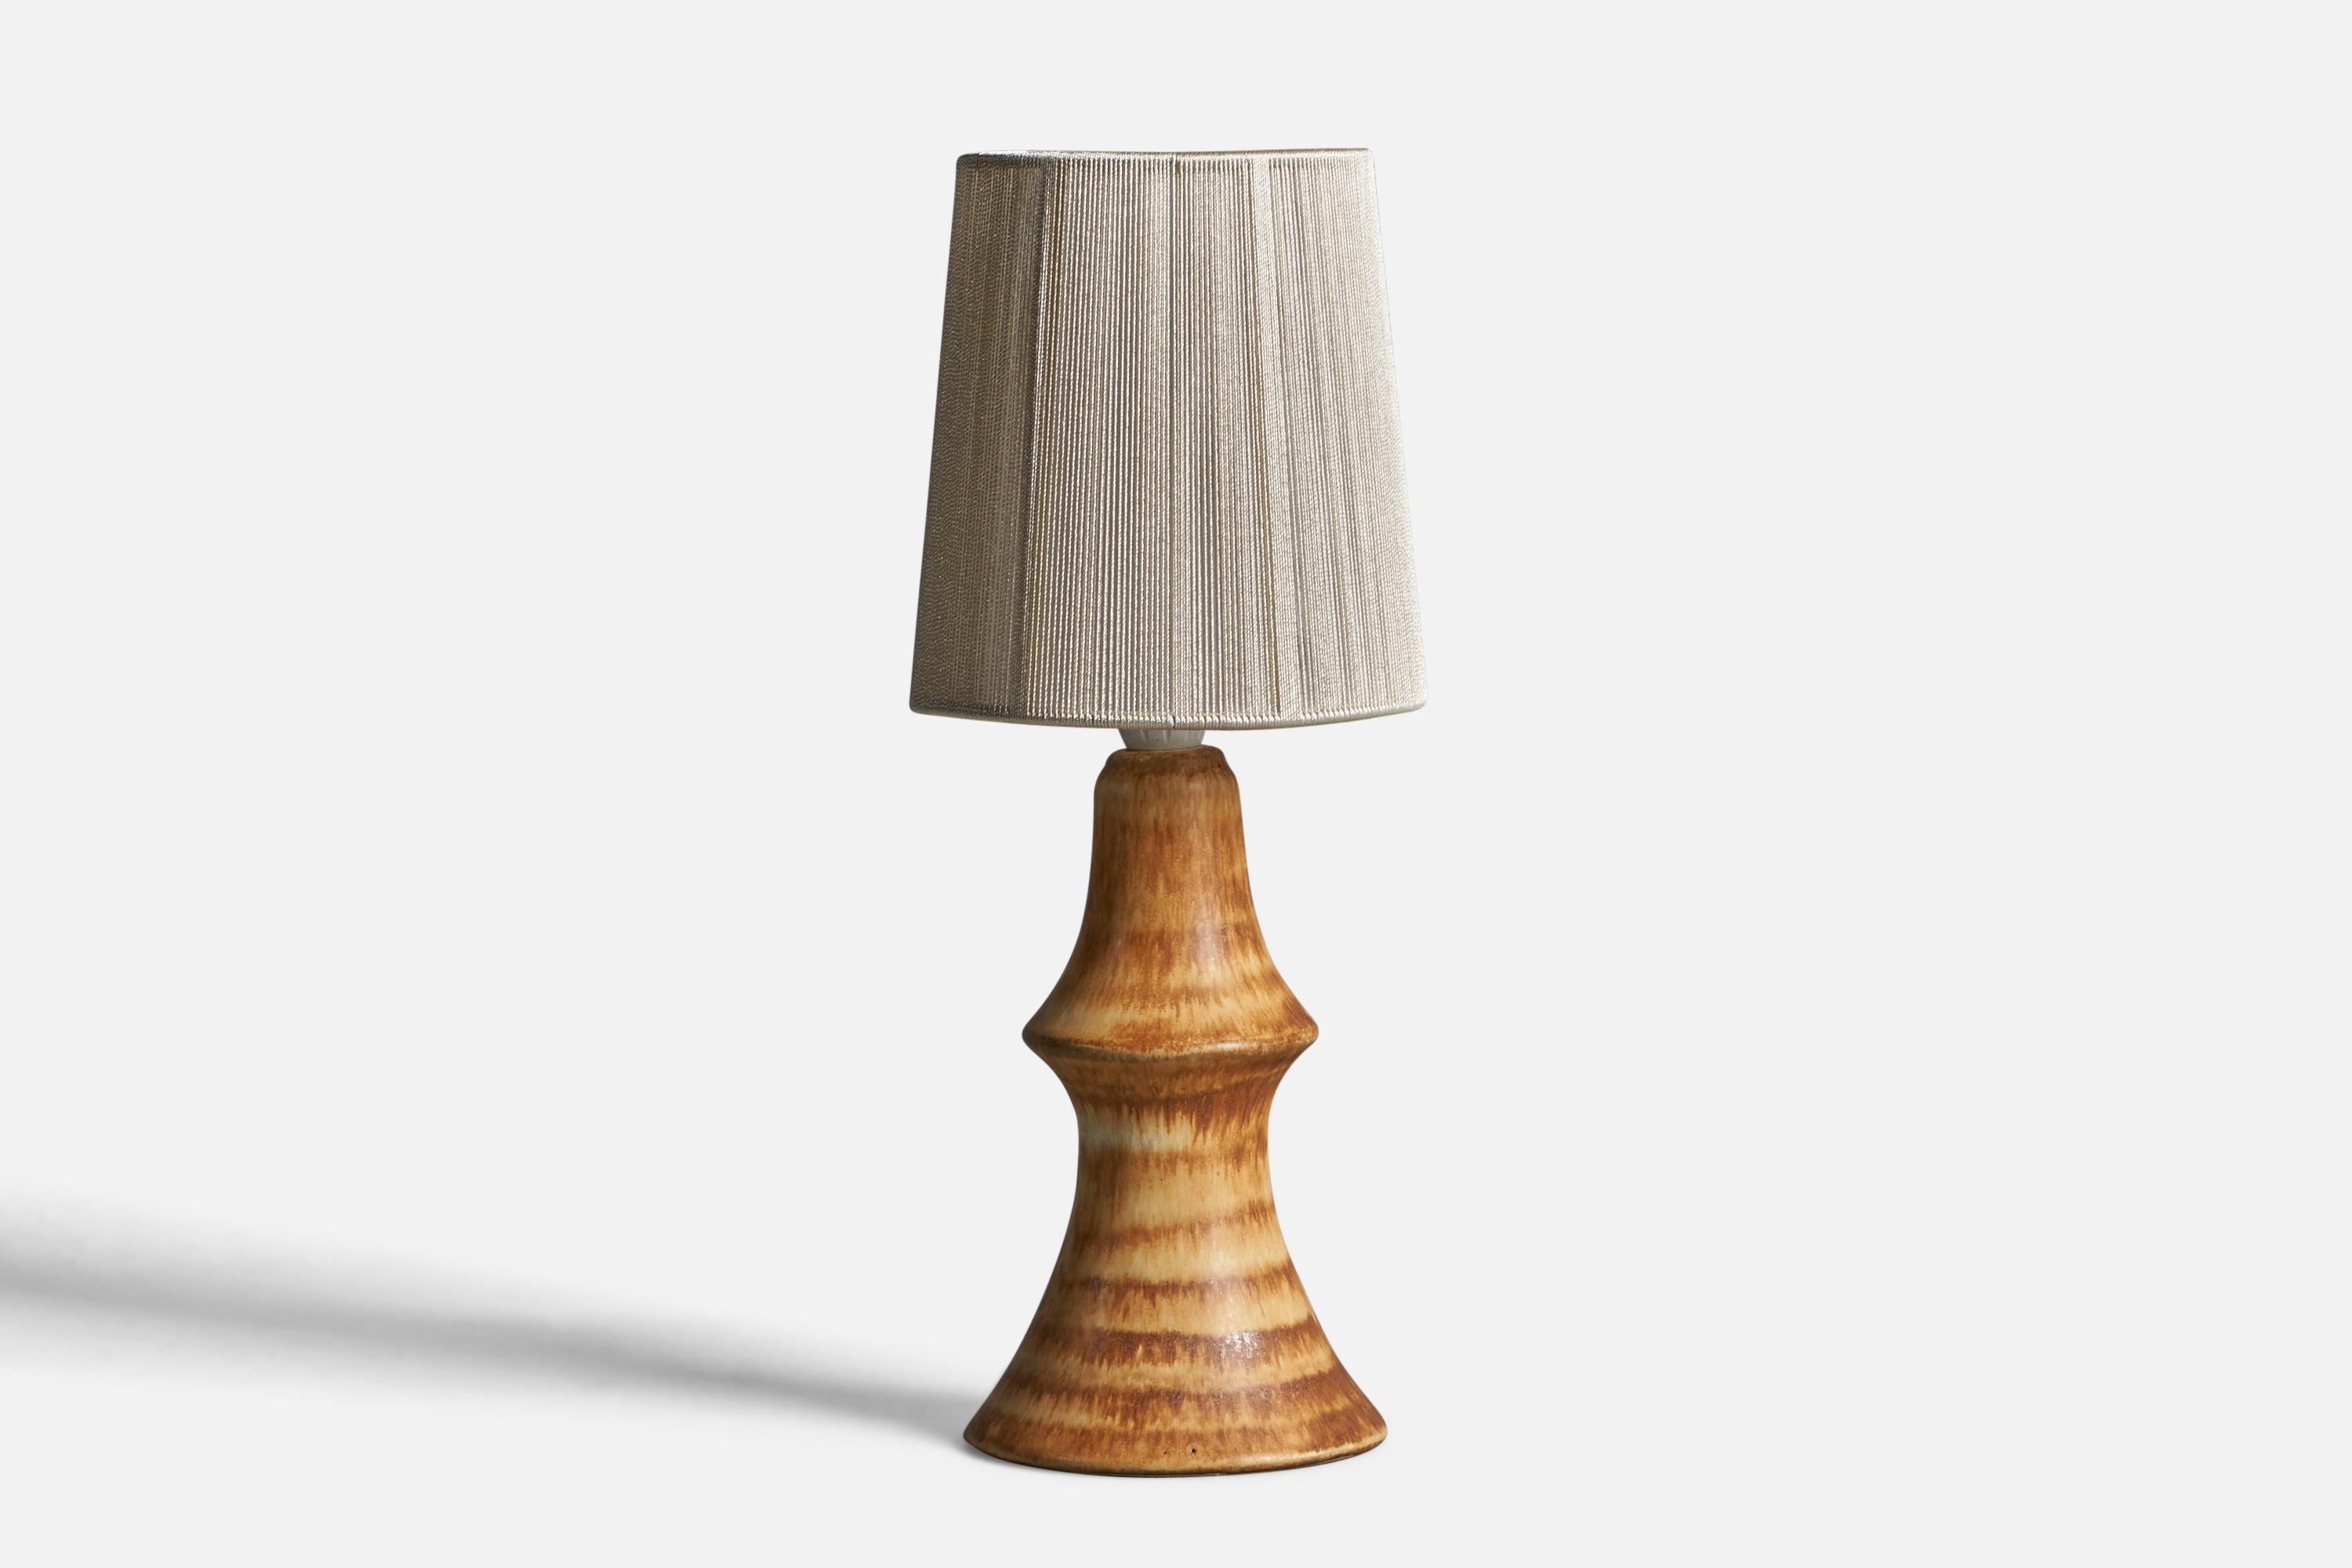 A beige brown stoneware and string fabric table lamp designed by Bruno Karlsson and Ego Stengods, Sweden, 1960s.

Overall Dimensions (inches): 15.25